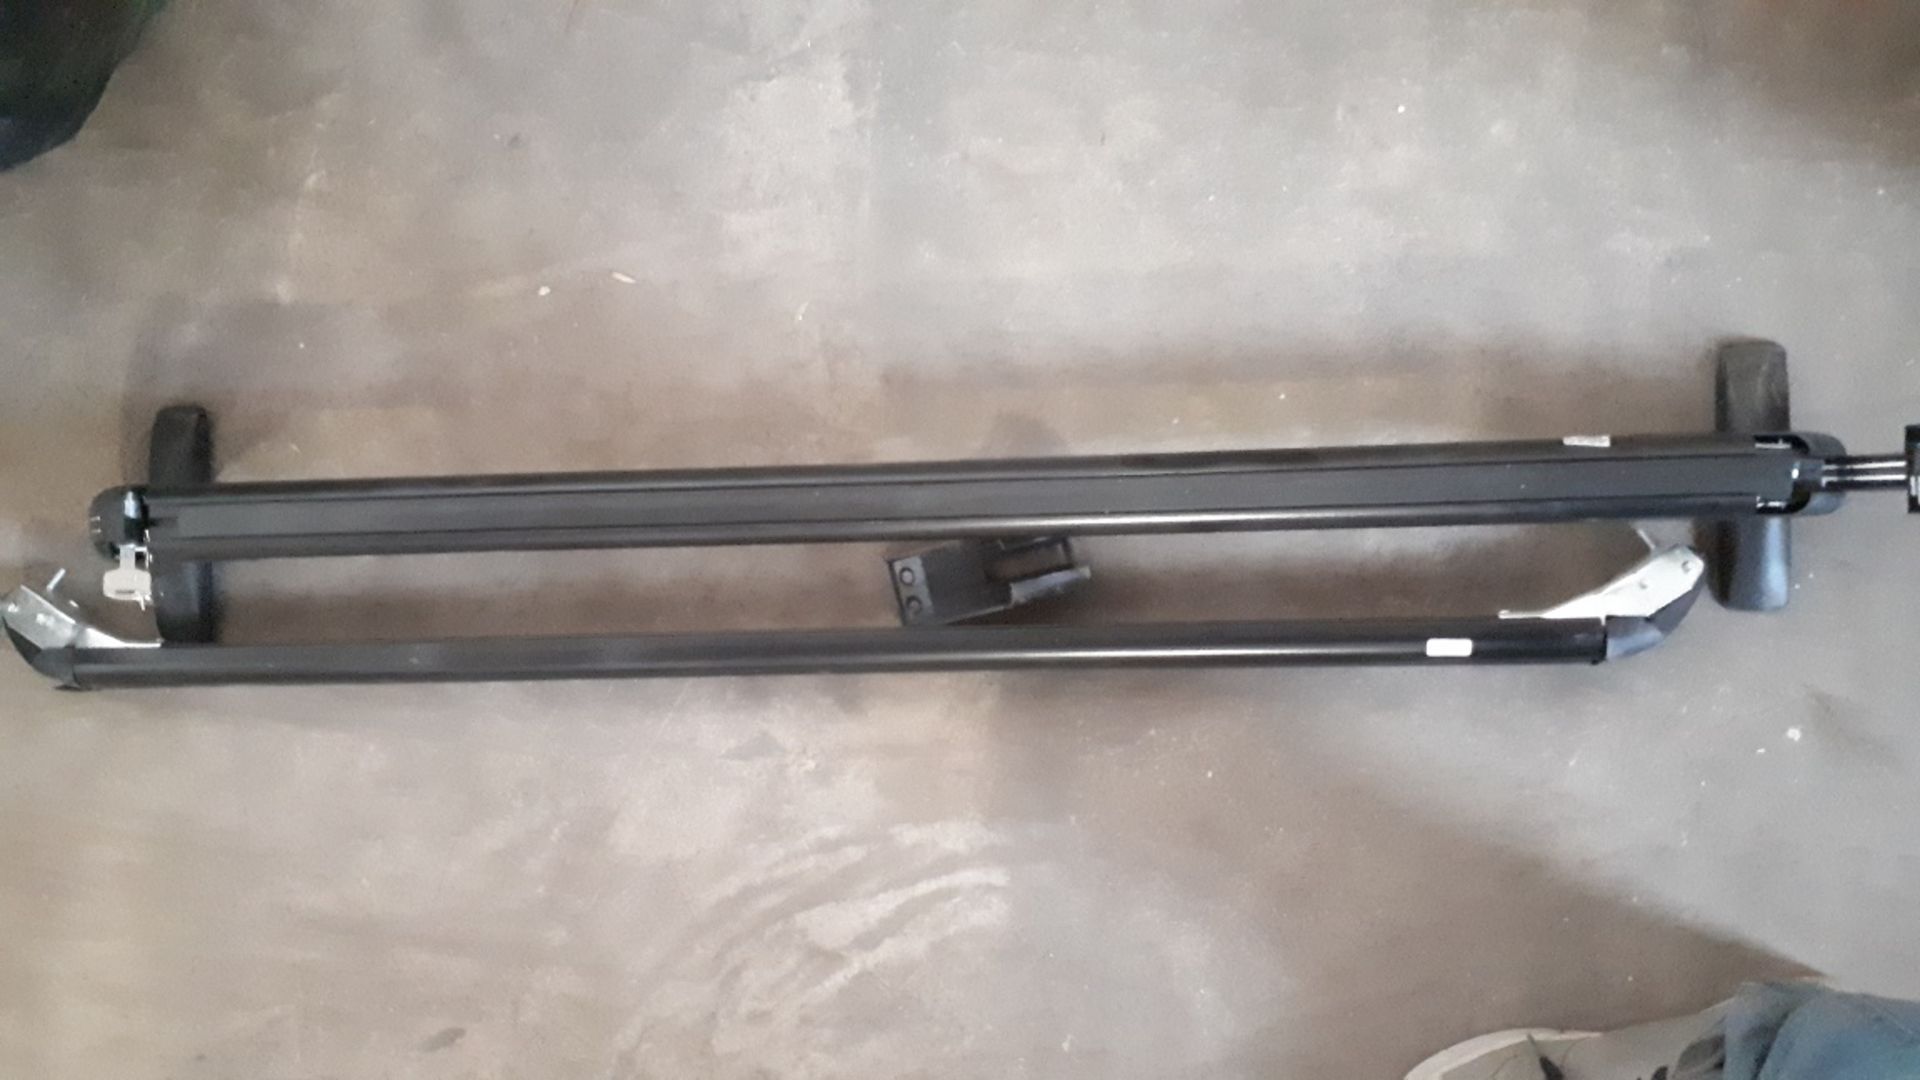 Unknown make or model roof rack as pictured